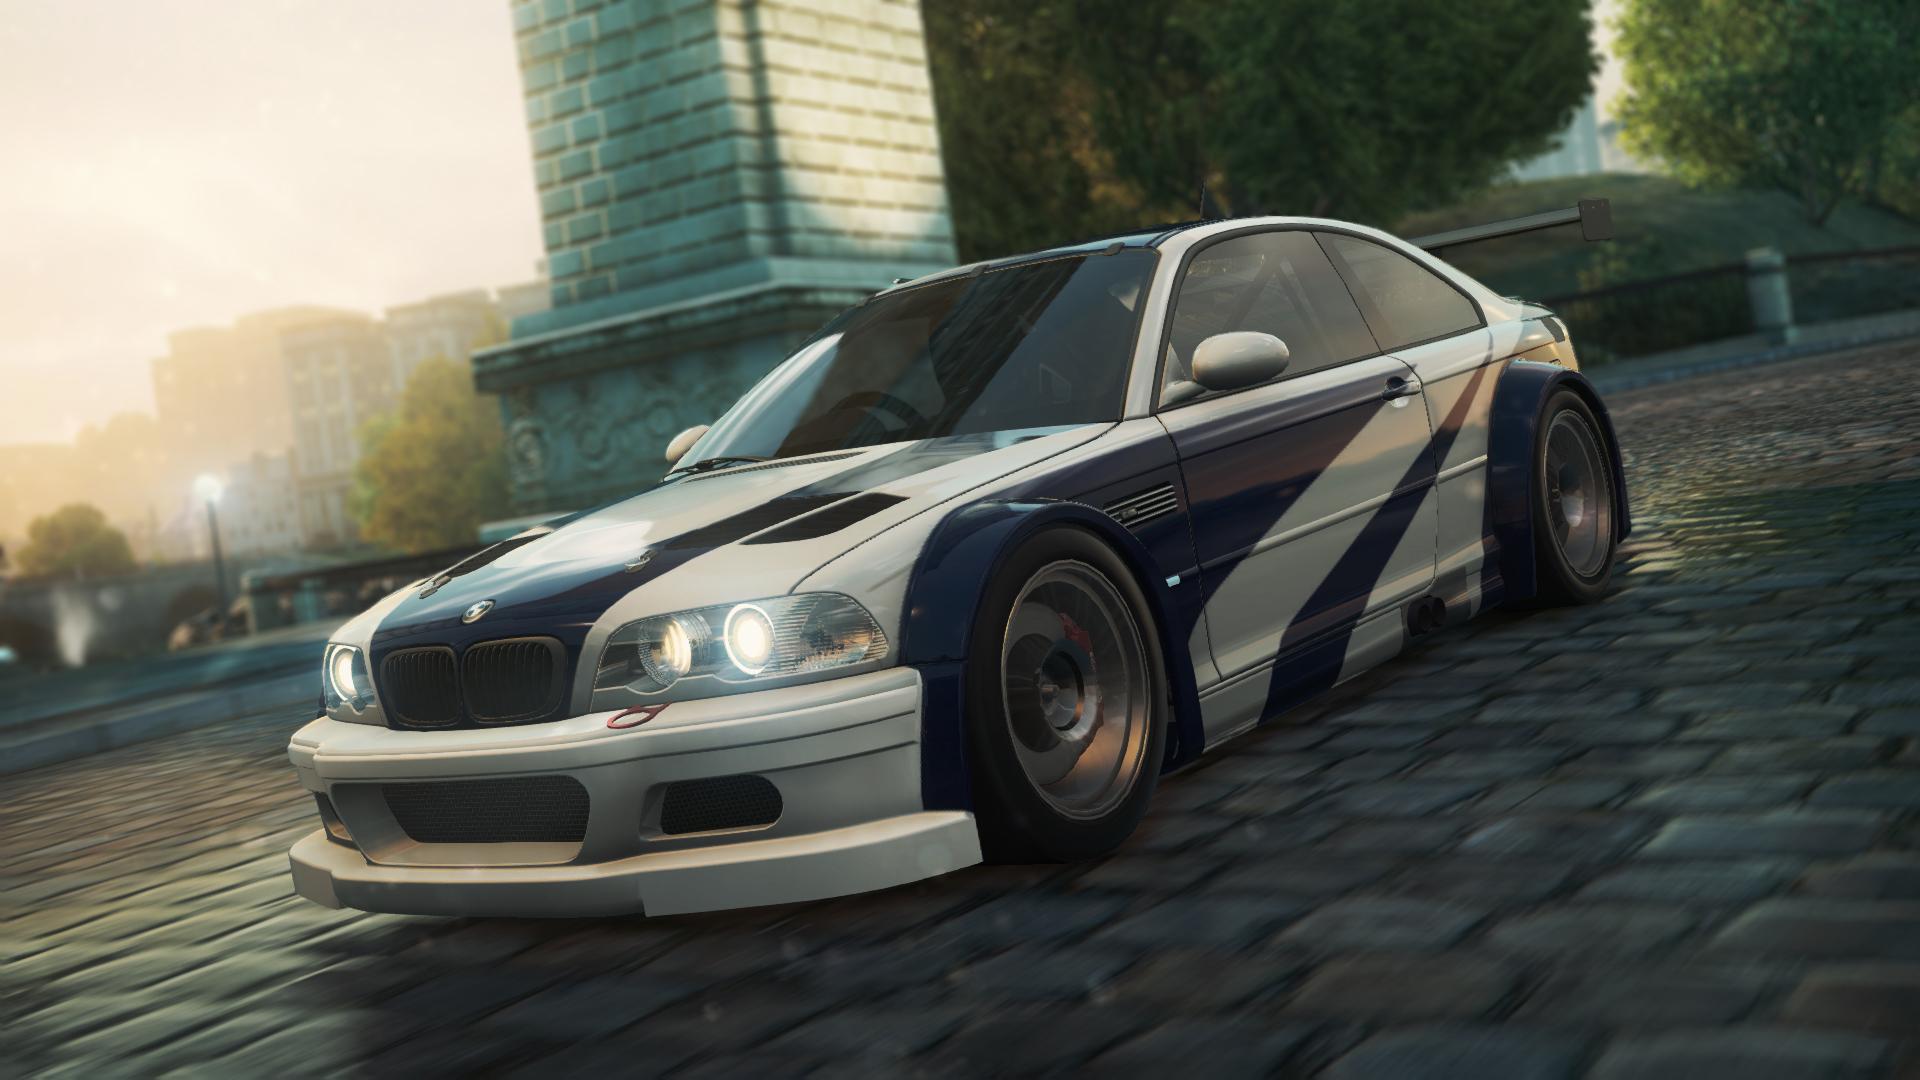 37+ Bmw M3 Gtr Most Wanted Wallpaper Phone free download